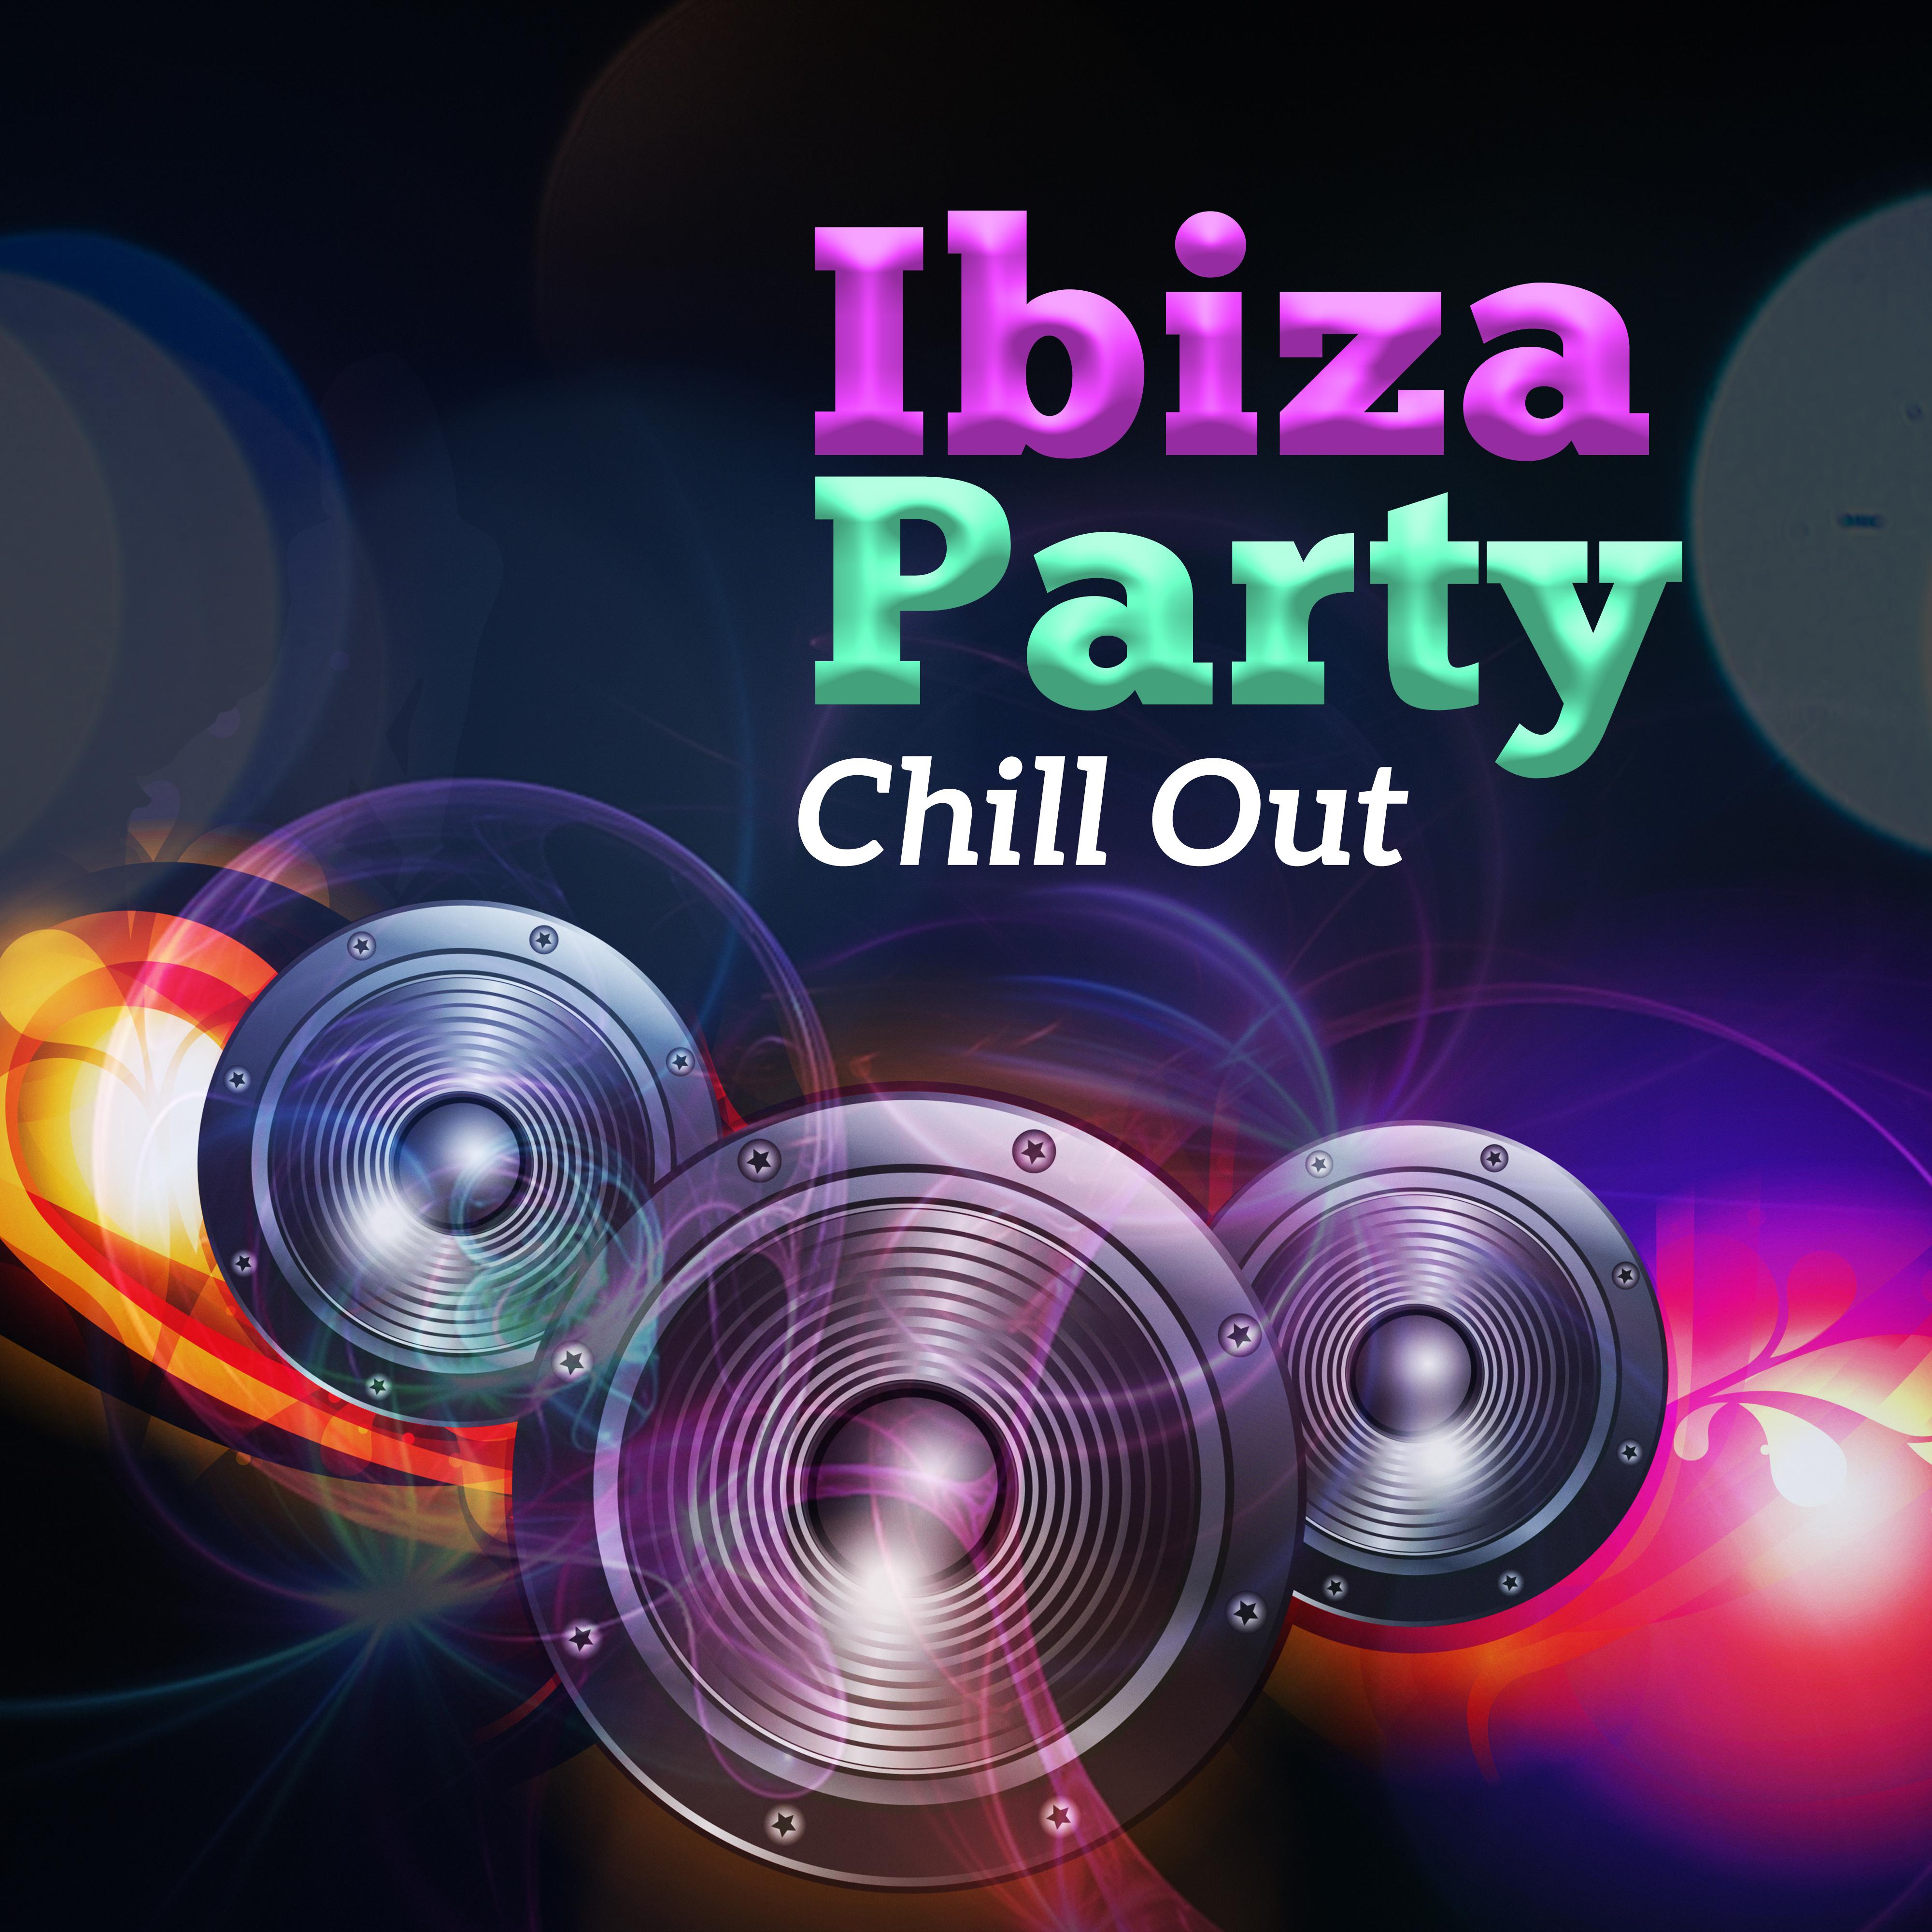 Ibiza Party Chill Out  Summer Fun, Beach Party Music, Electronic Vibes, Peaceful Waves